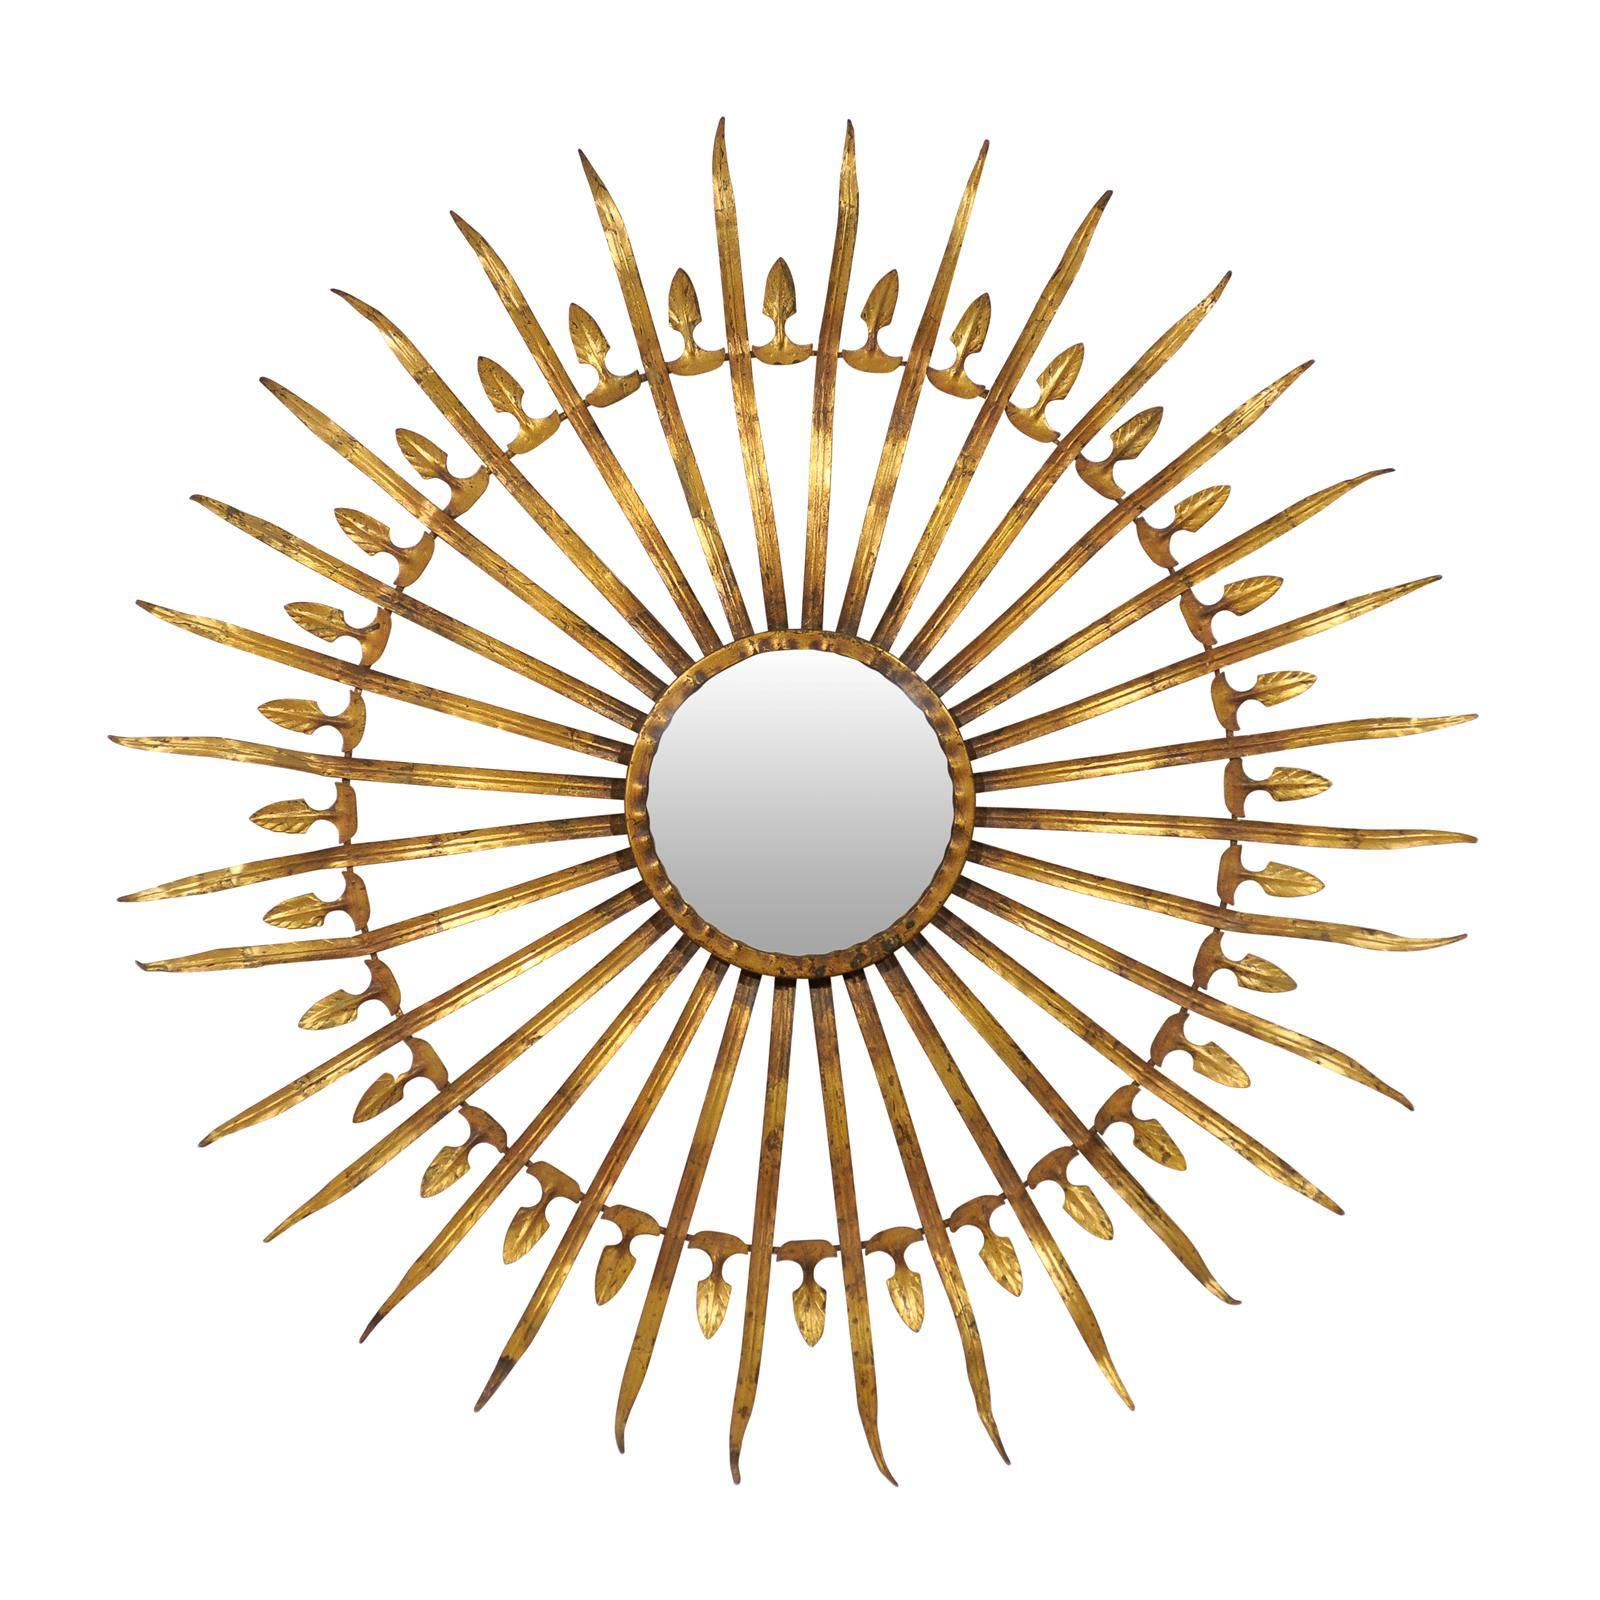 French Sunburst and Foliage Motif Gilded Metal Wall Ornament with Round Mirror